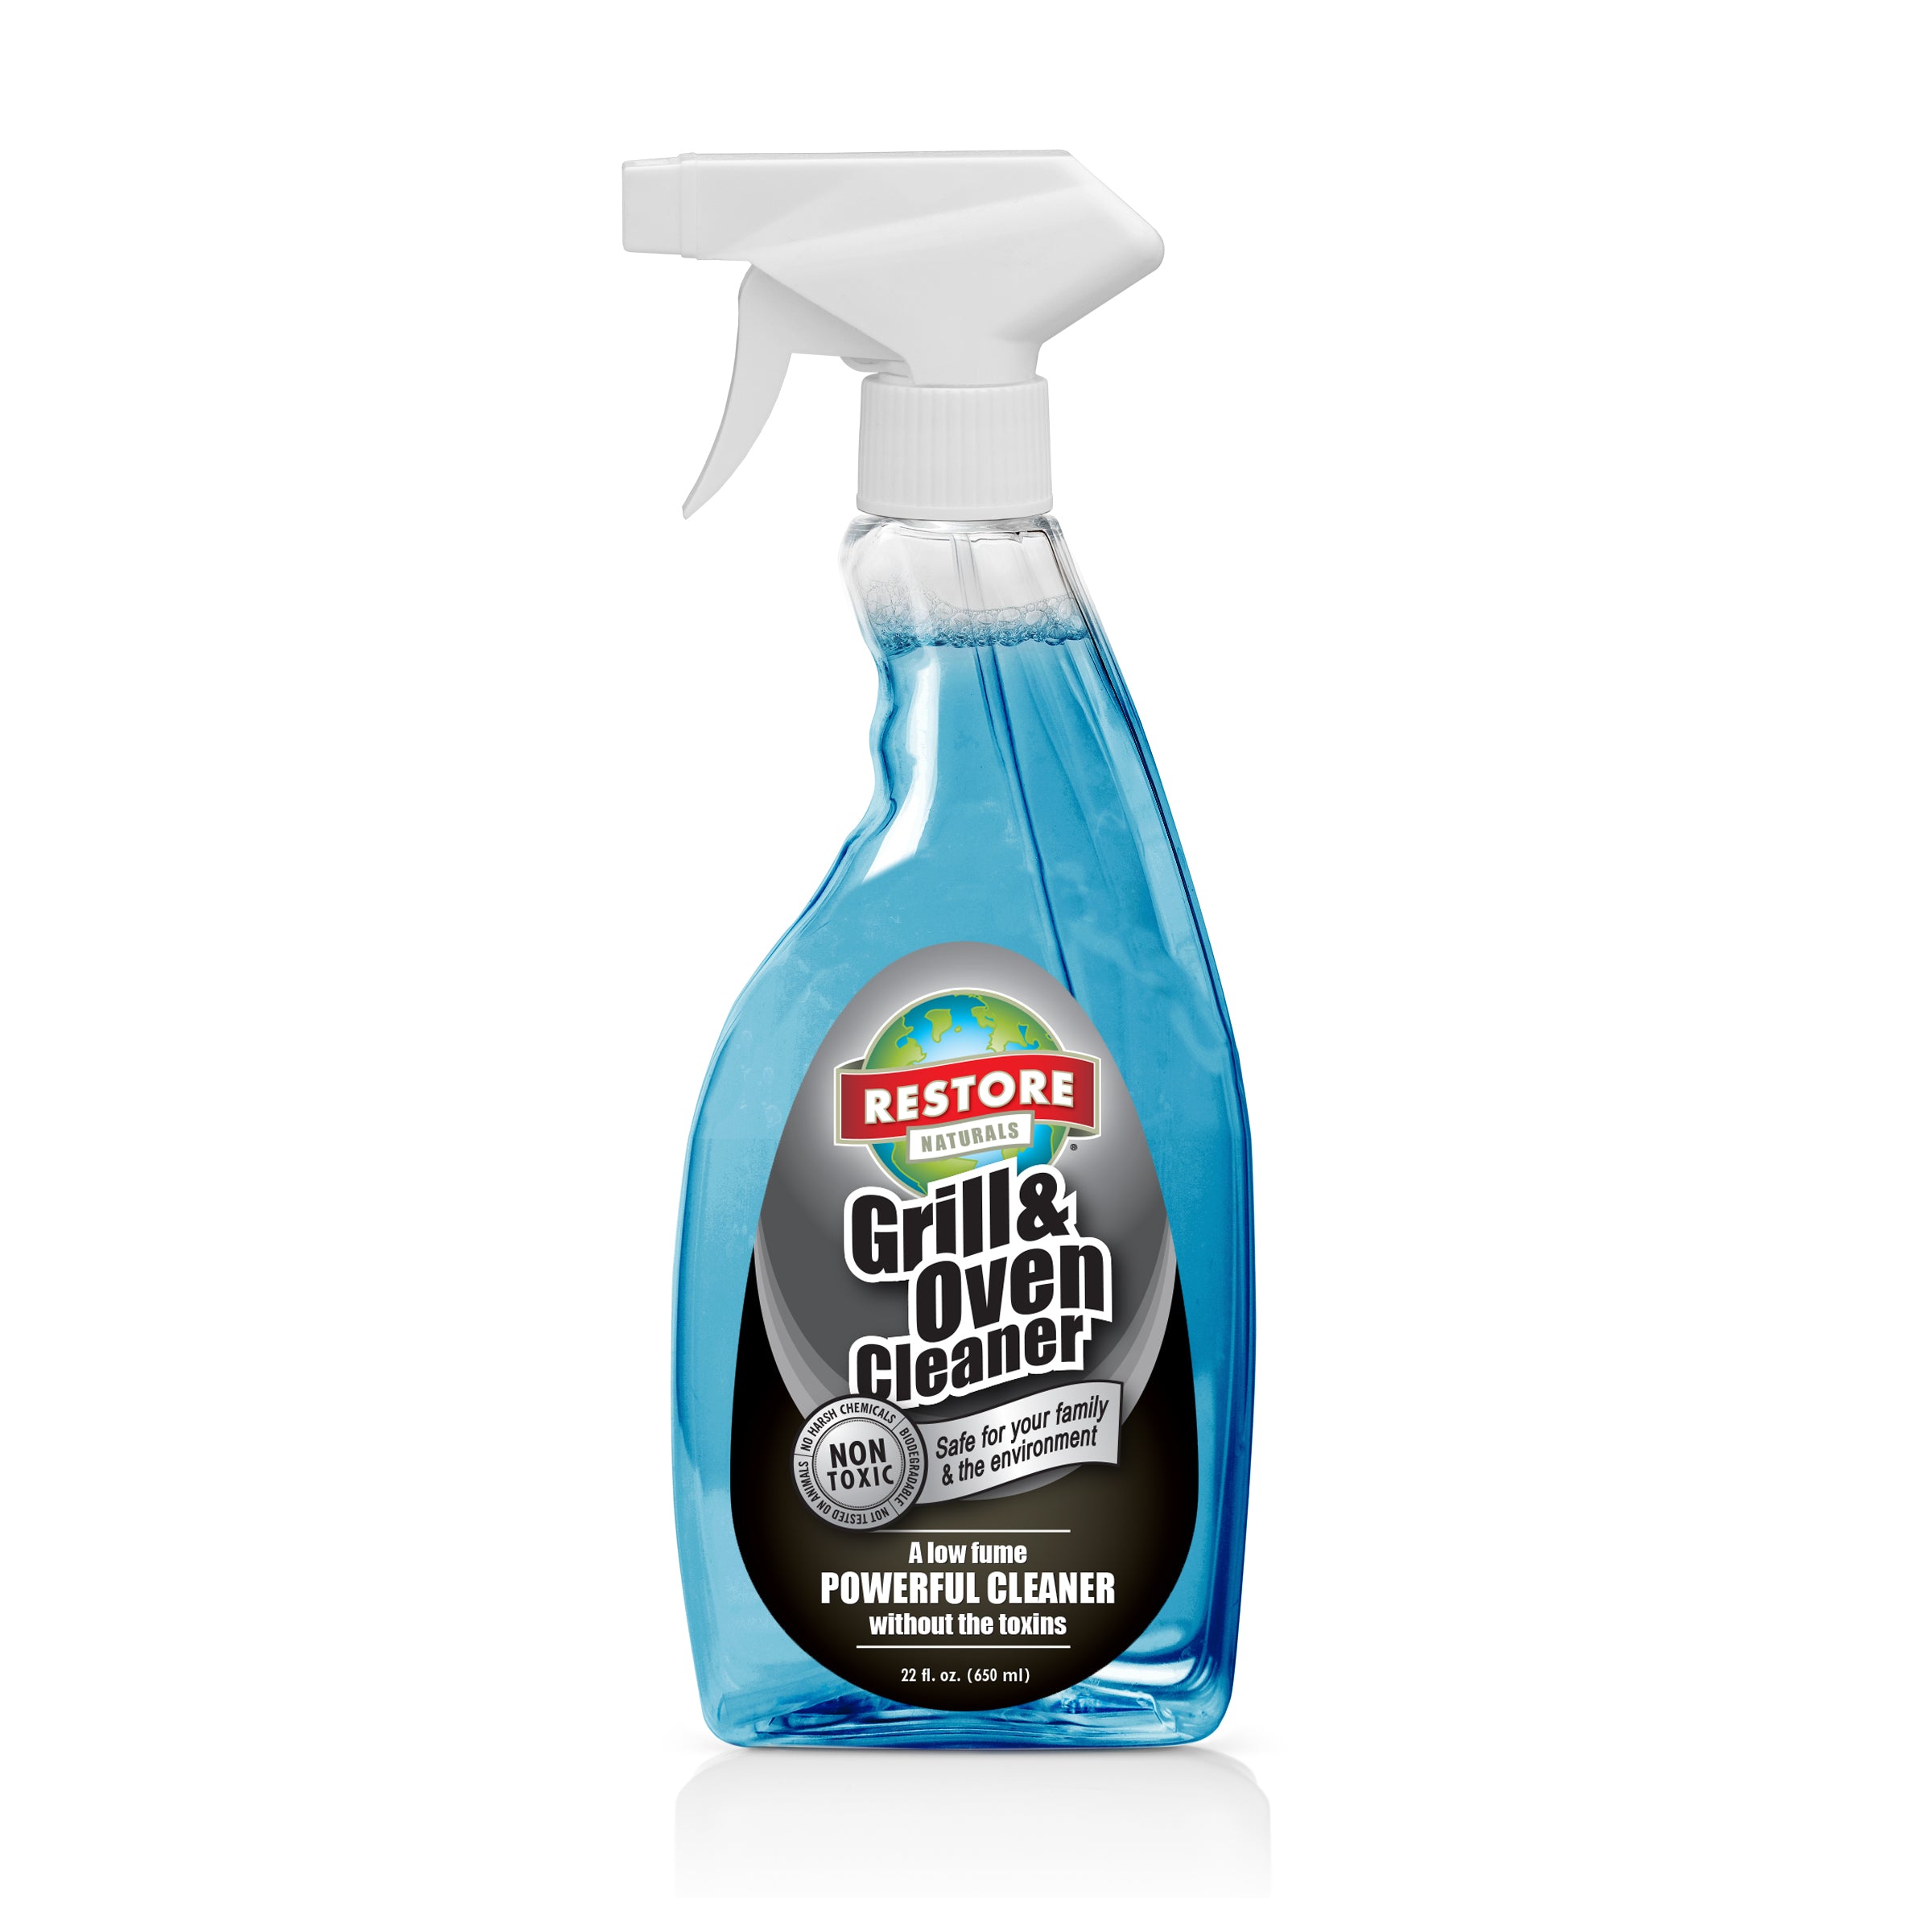 Grill Cleaner - Degreases Grills & Grates